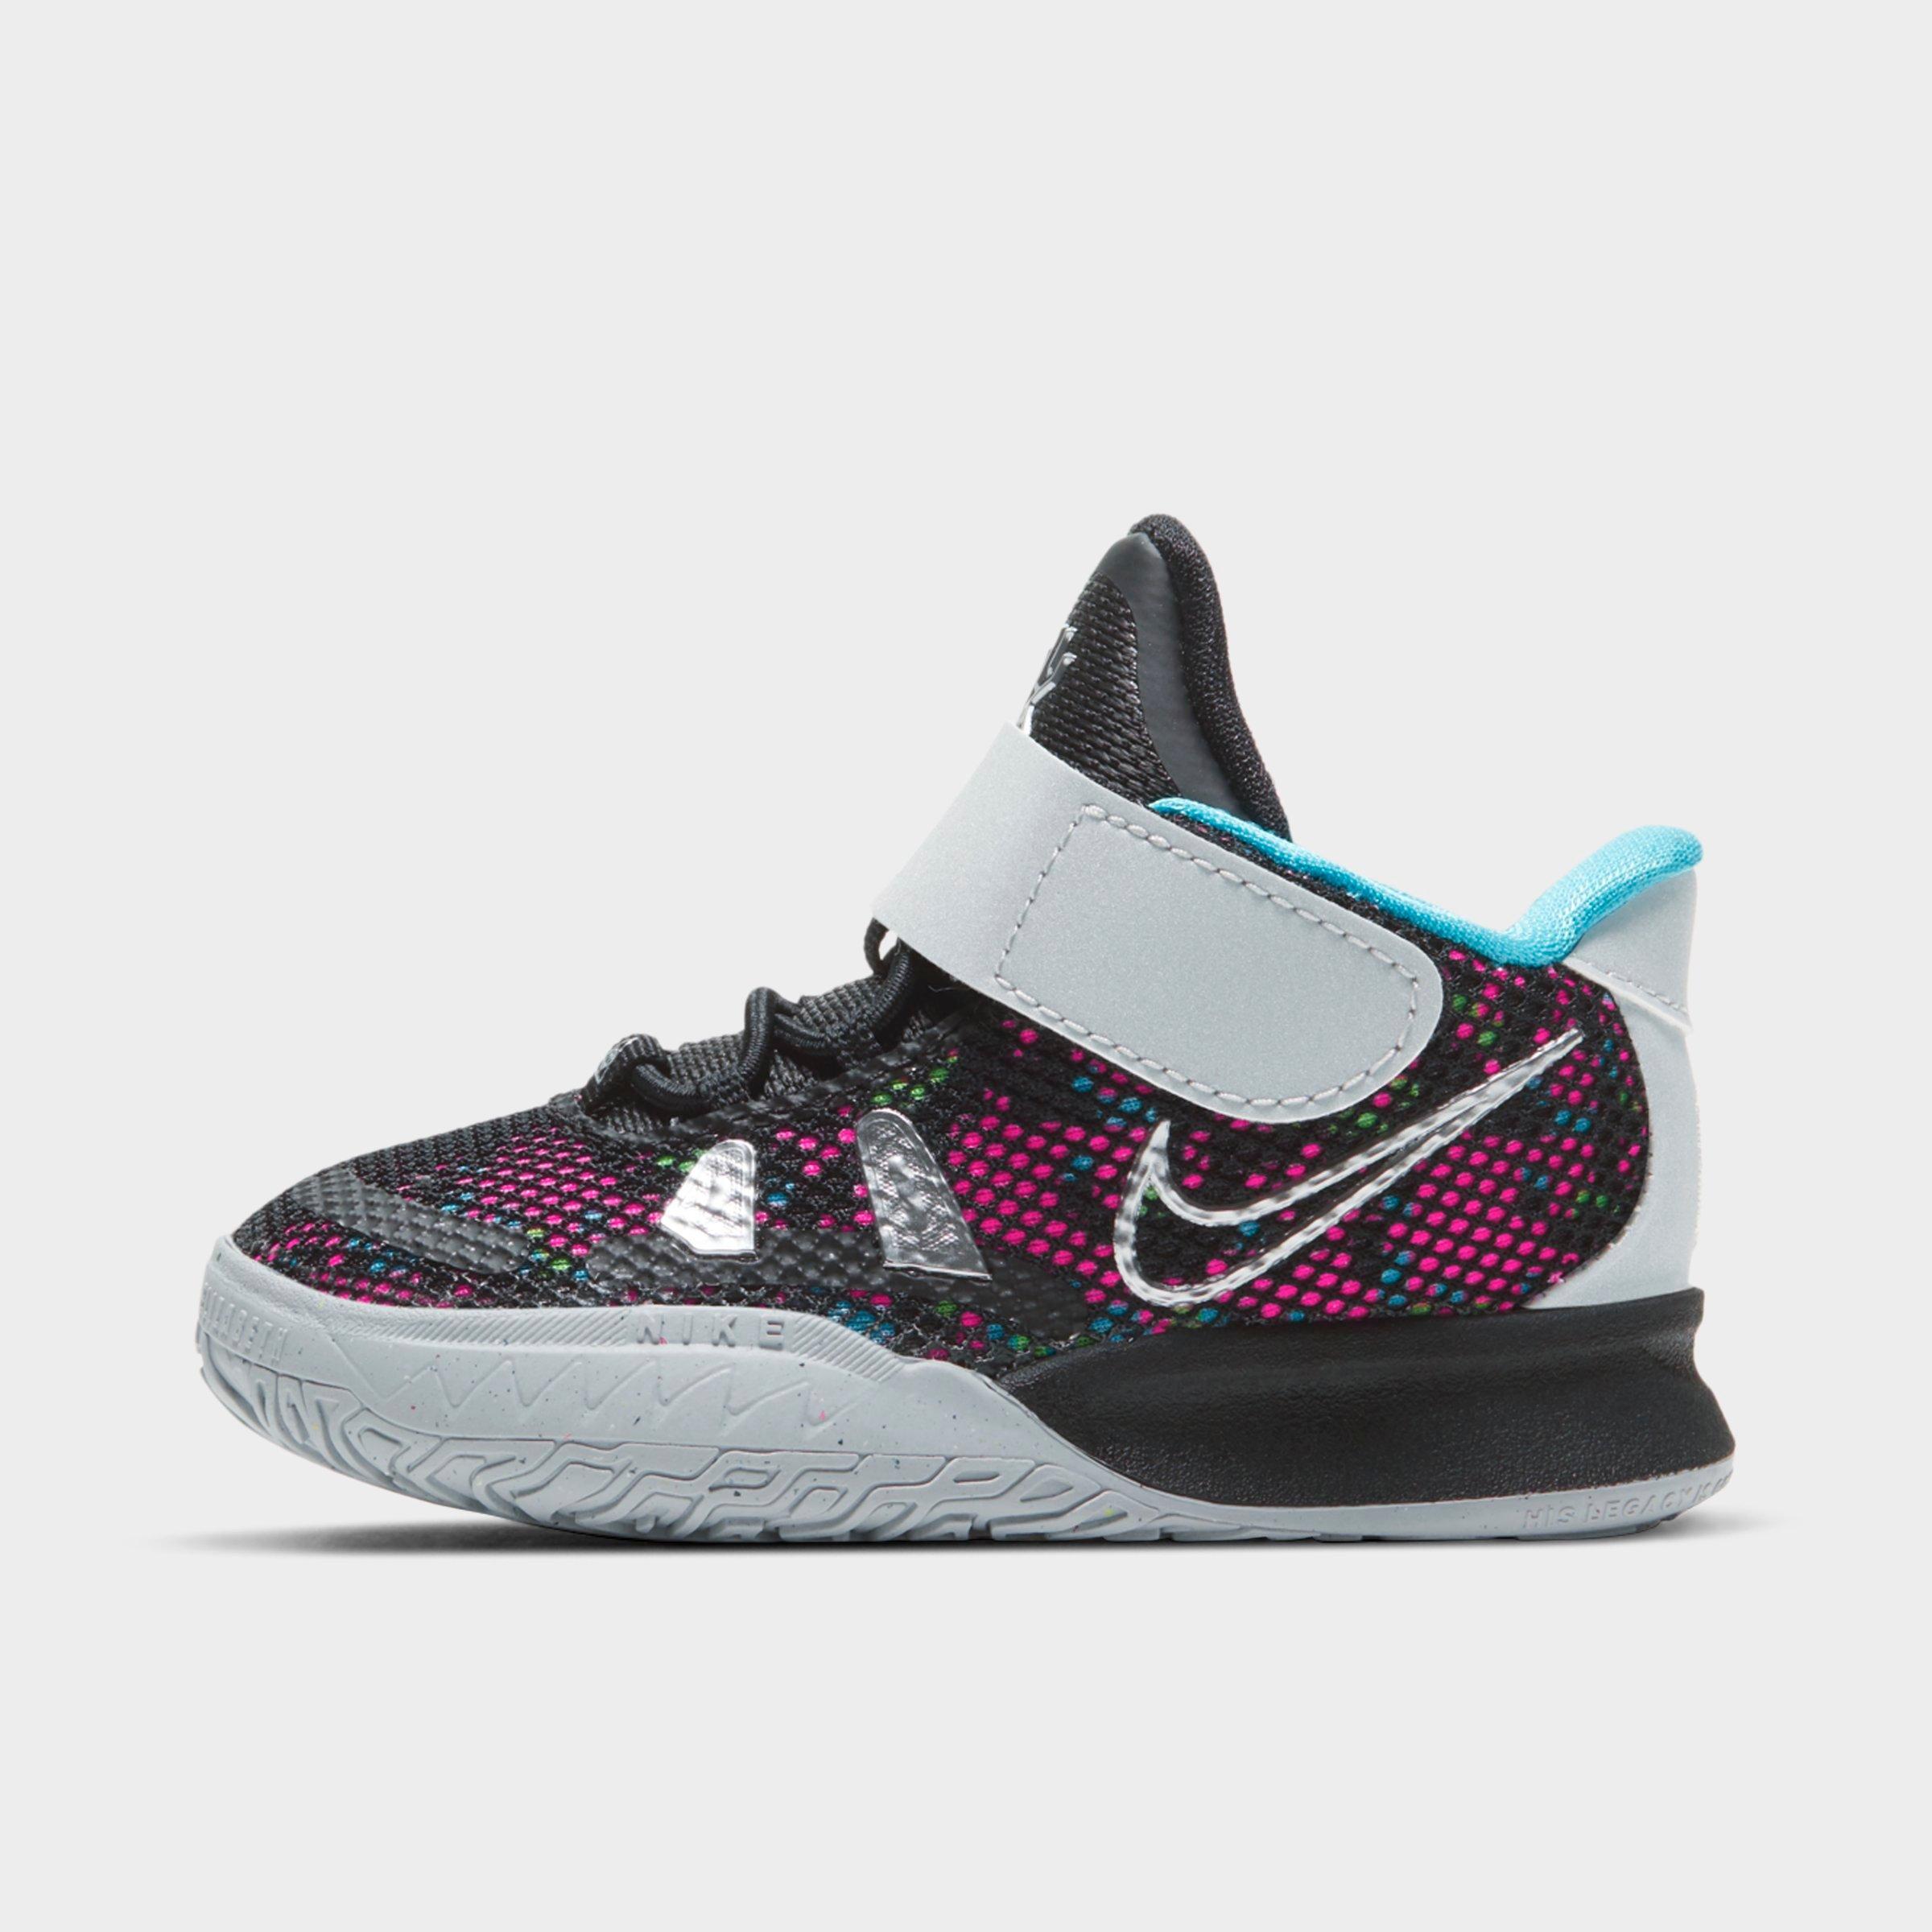 finish line kyrie